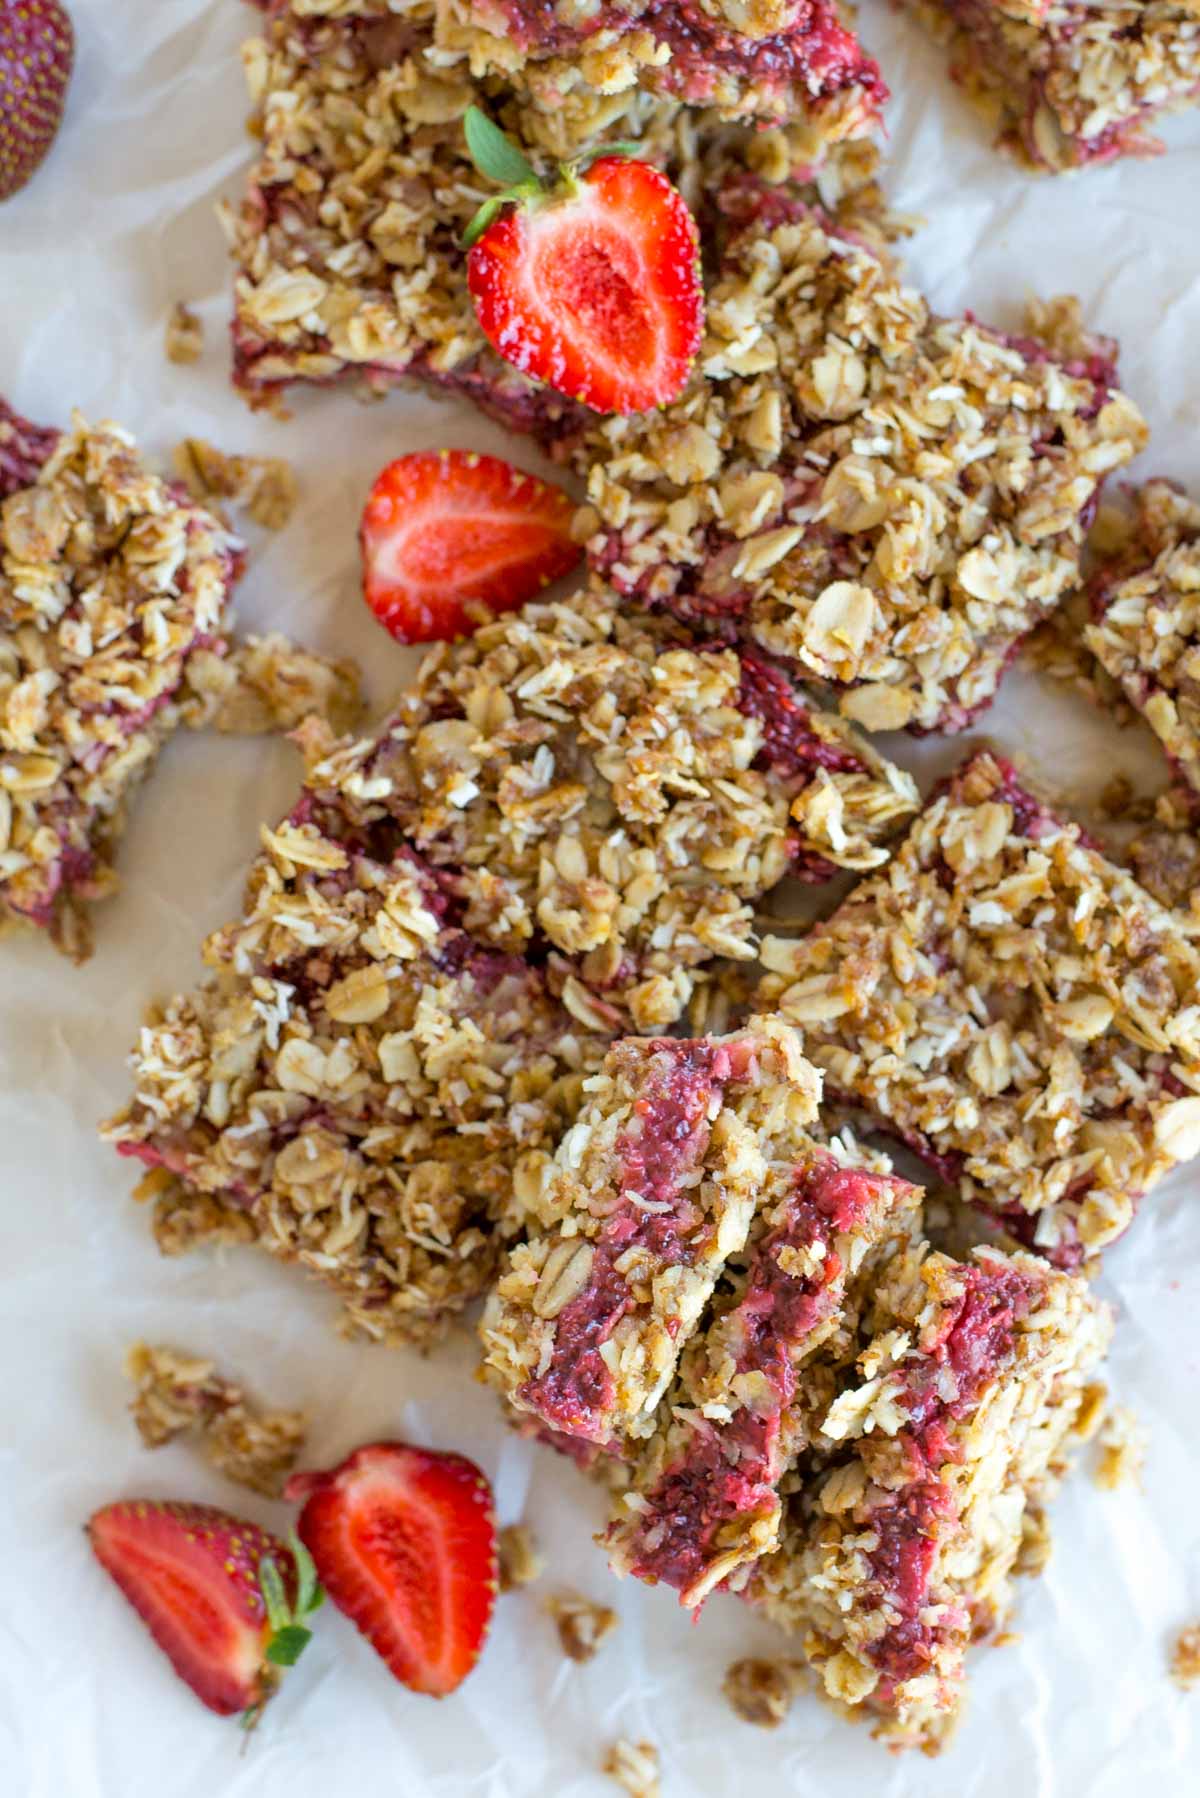 These 10 minute strawberry stuffed healthy oatmeal bars are the perfect on the go snack, even passing as a quick breakfast.